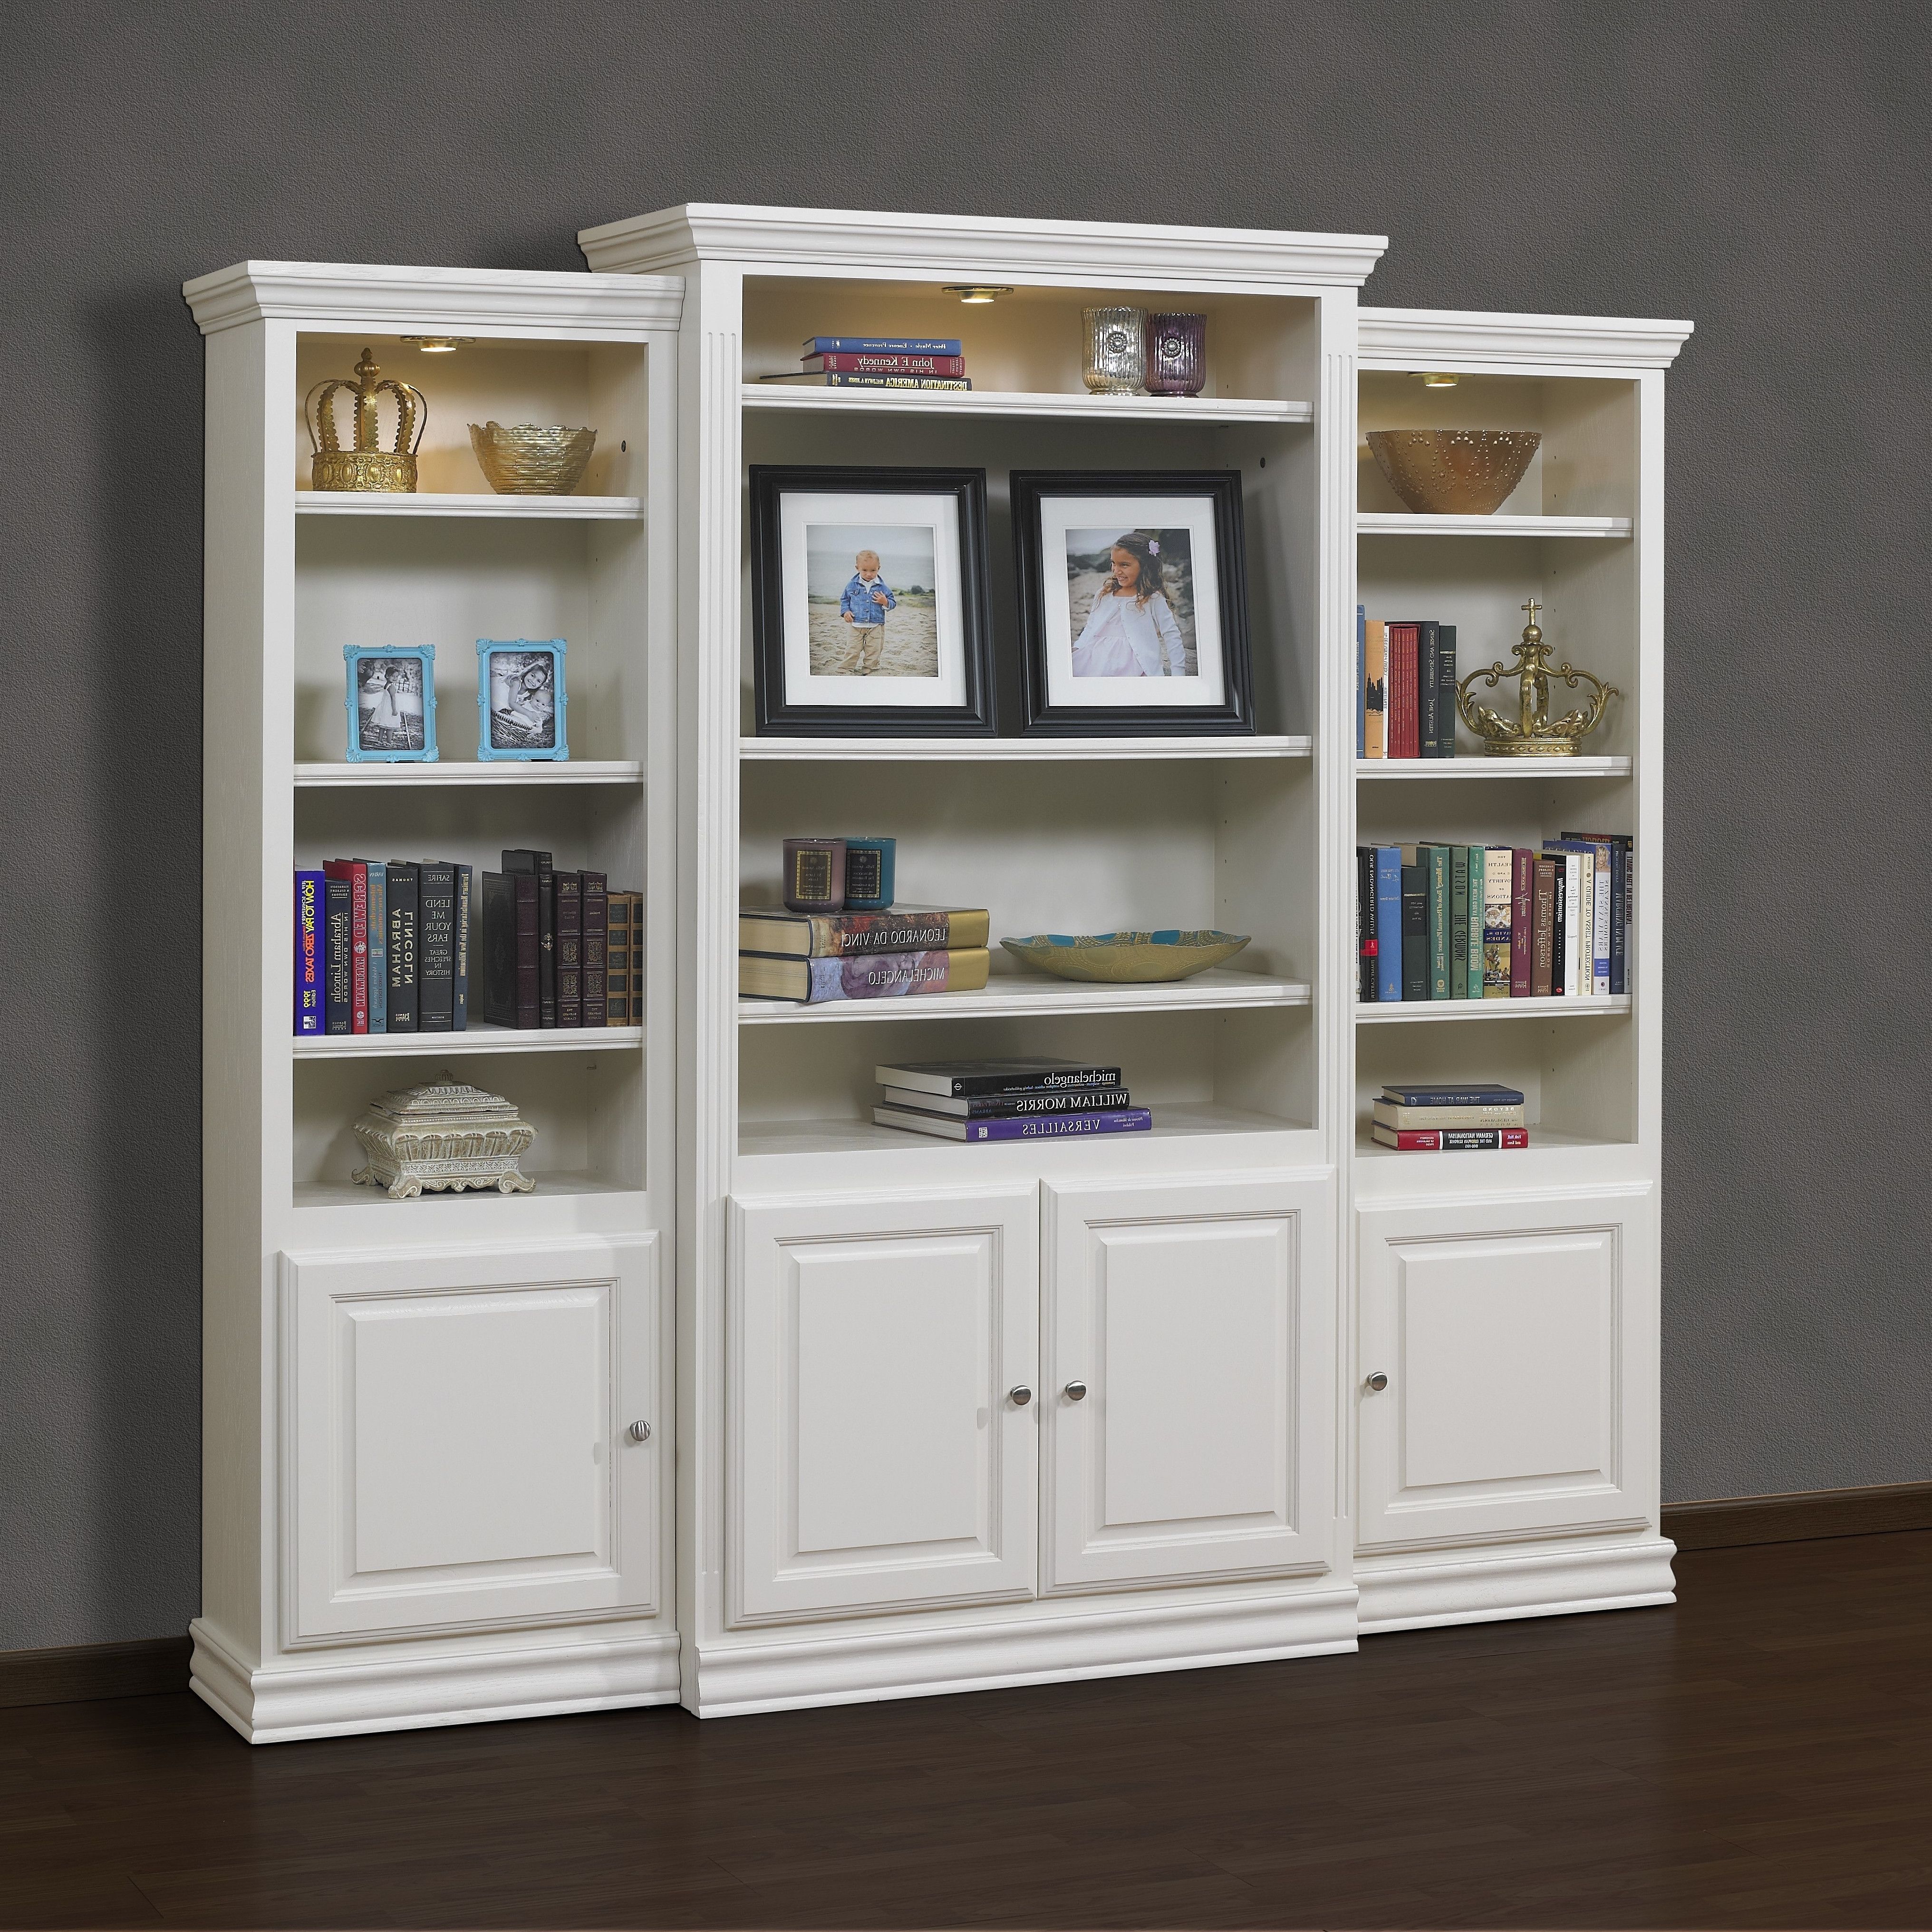 Tremendous Bookshelf Cabinet White Bookcase With Glass Door Intended For Current White Bookcases With Cupboard 